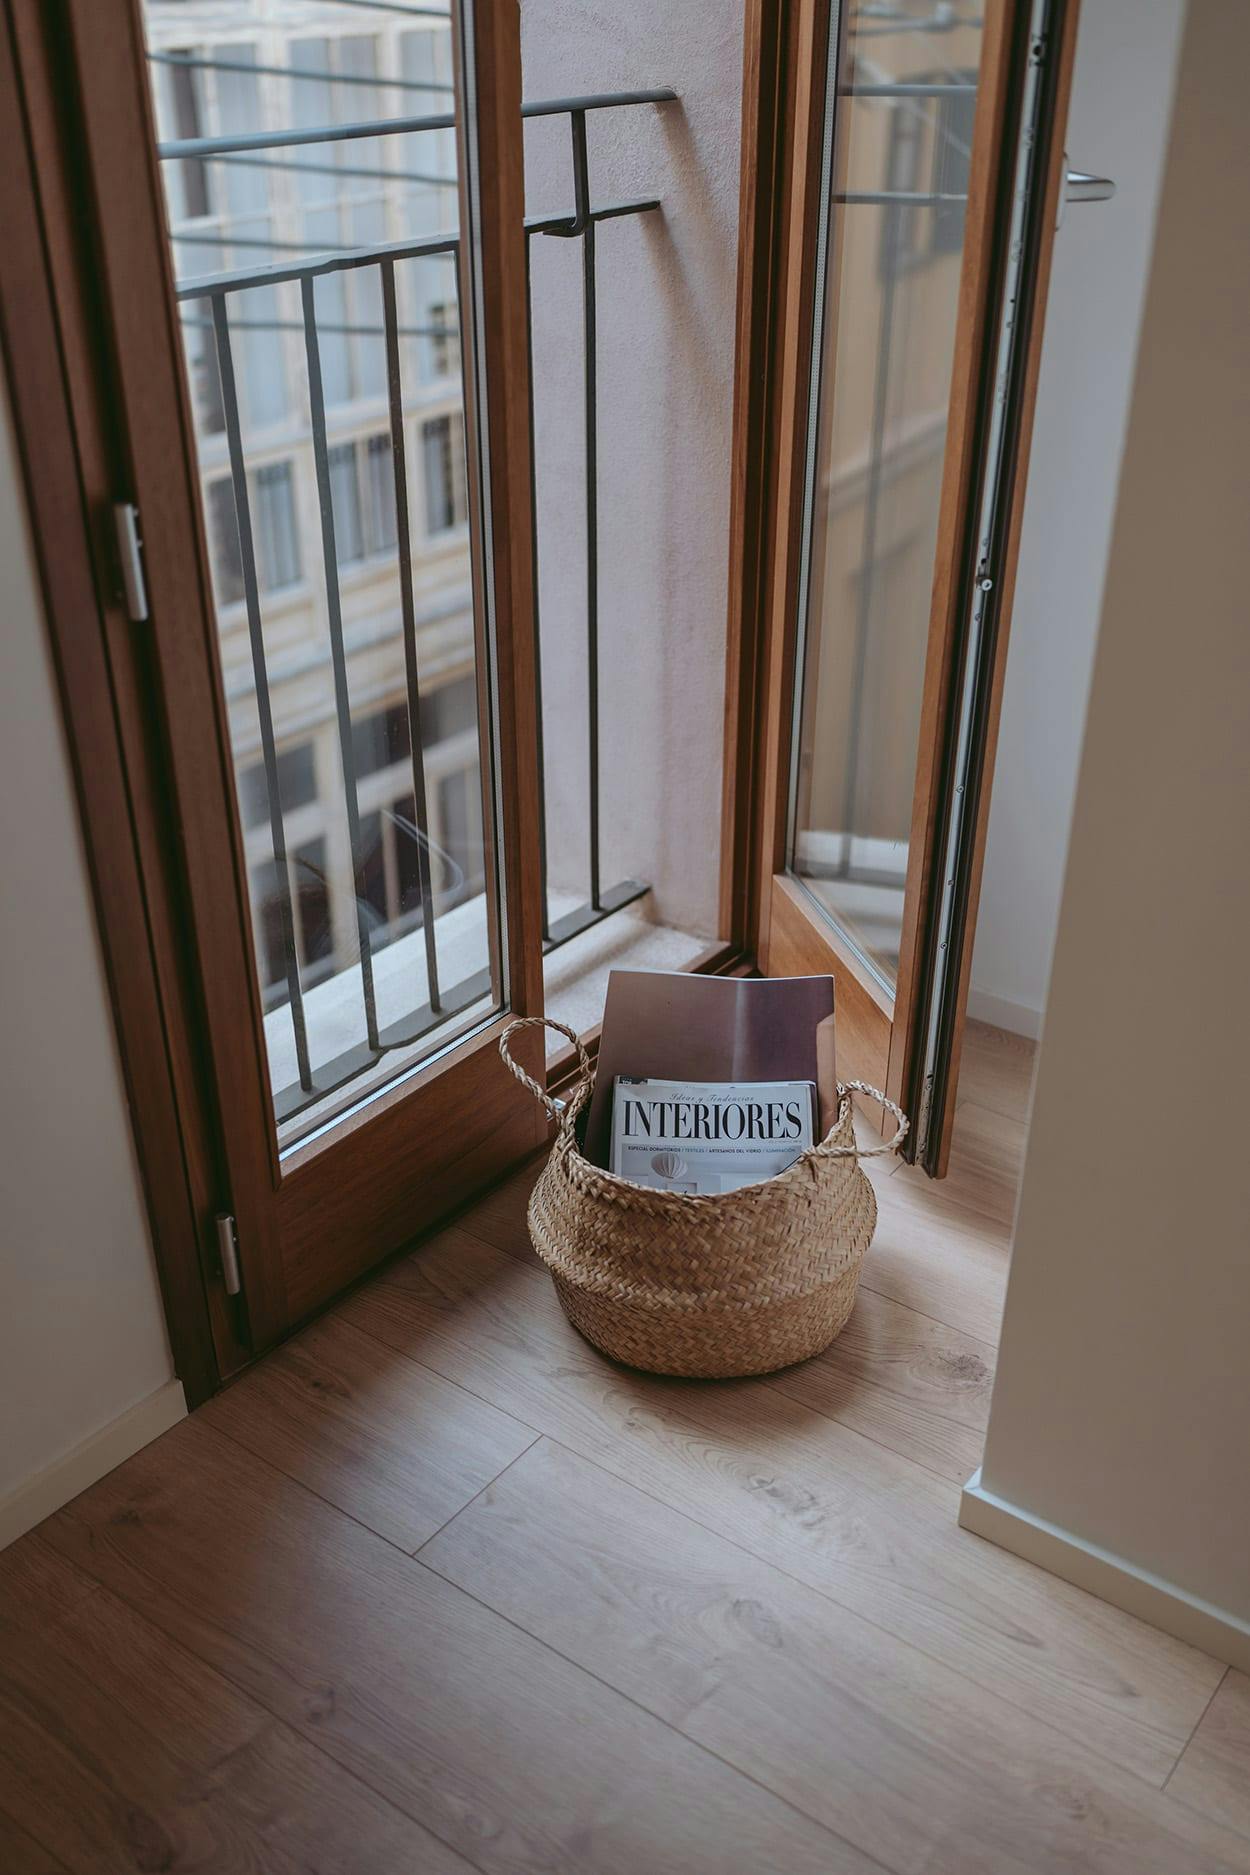 A small basket is placed on a wooden floor next to a window, with a cat sitting inside.